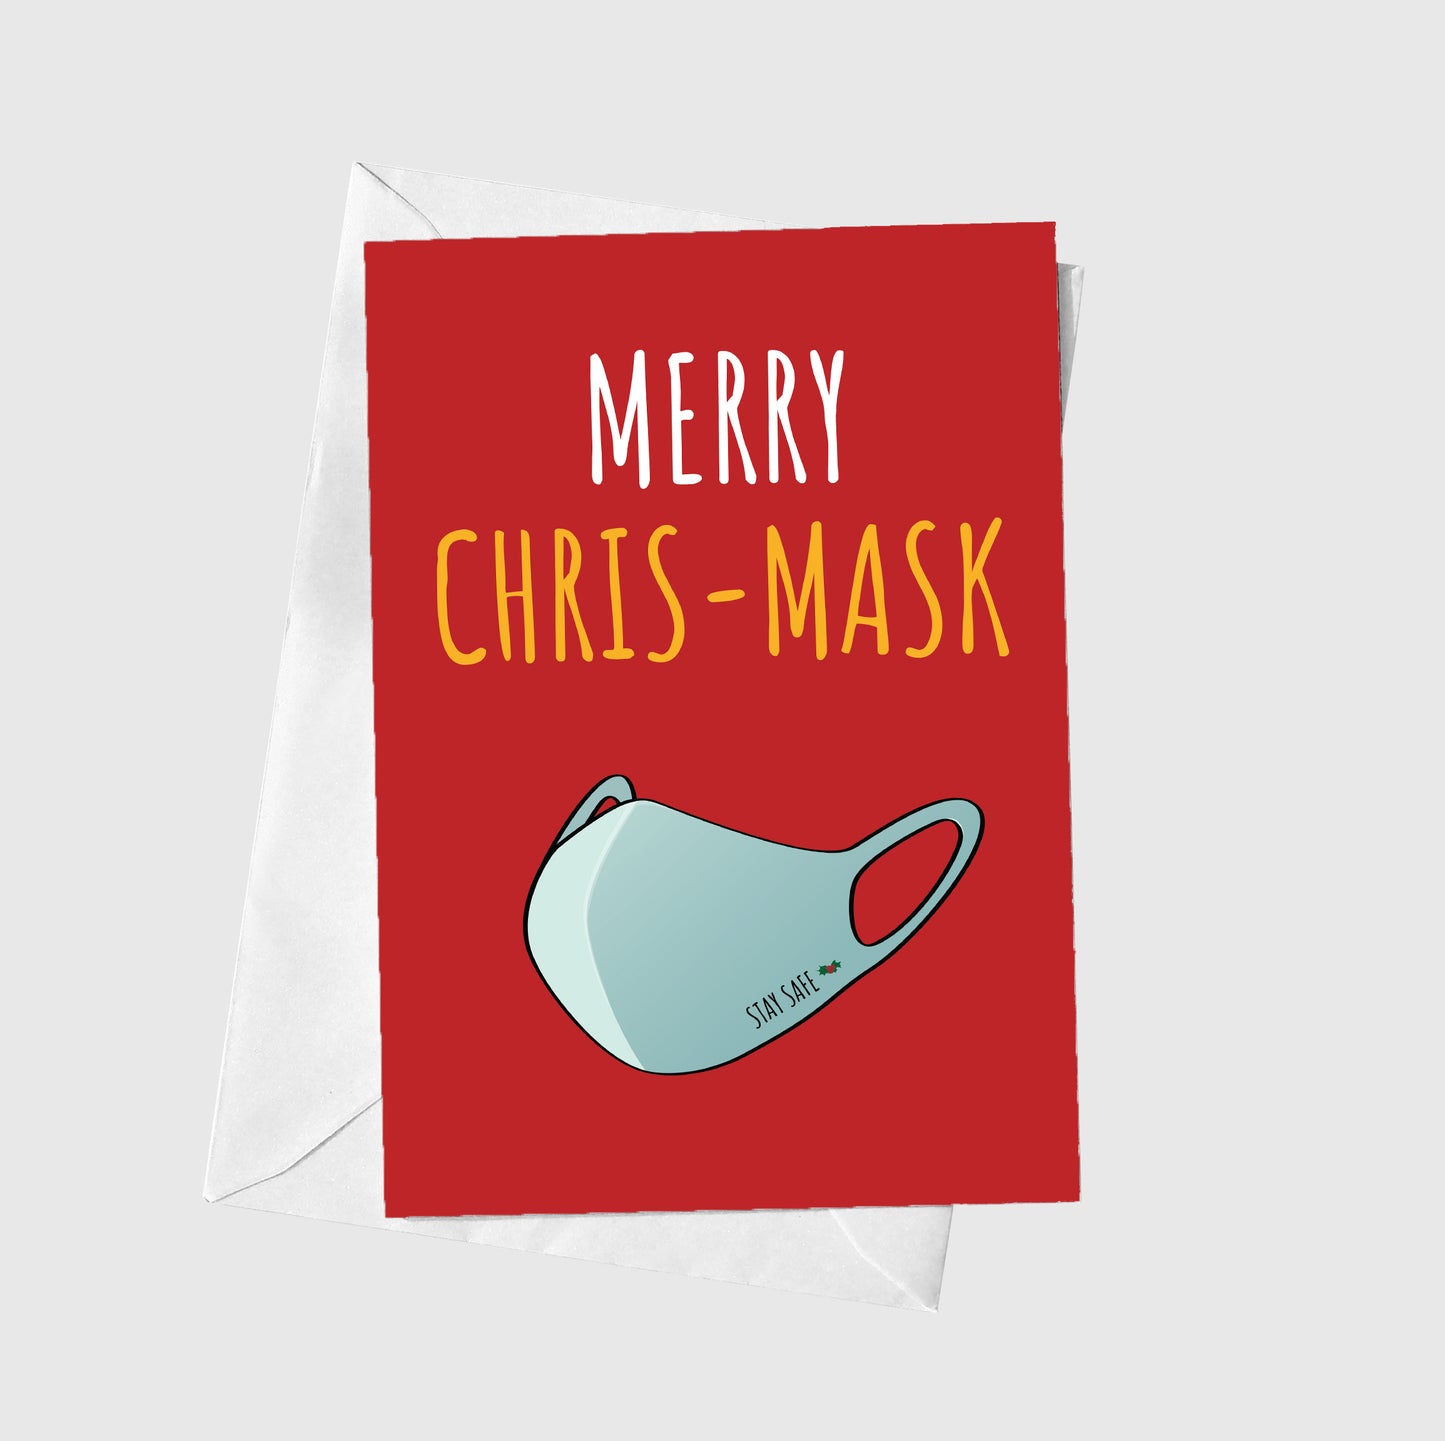 Merry Chris-MASK (Stay Safe)